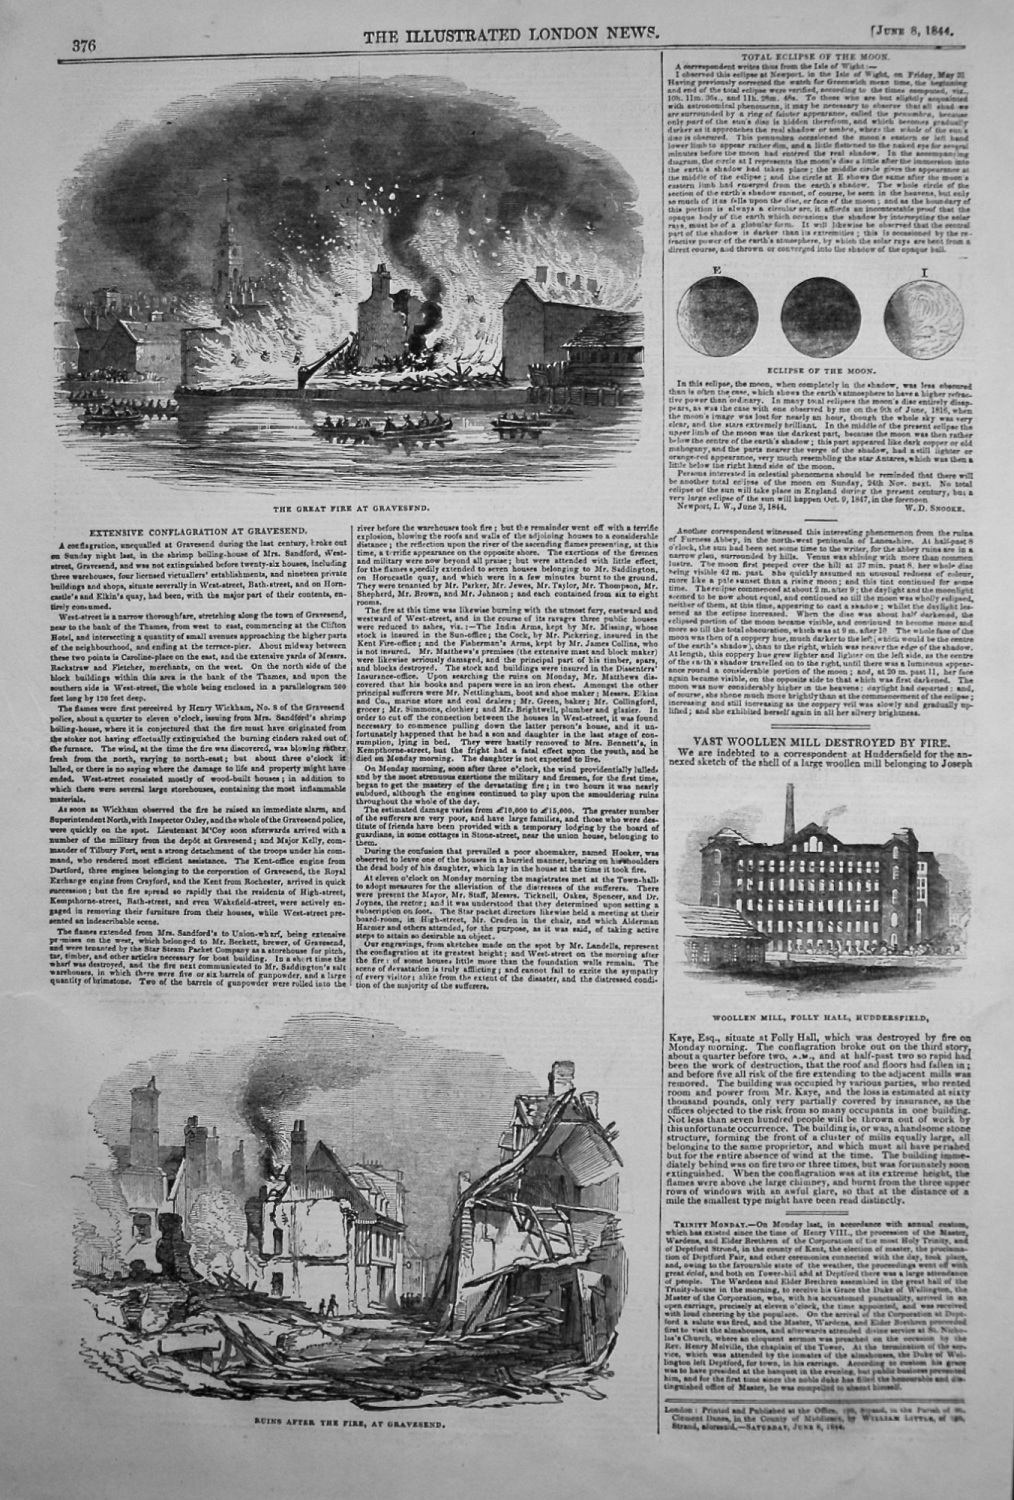 Extensive Conflagration at Gravesend. 1844